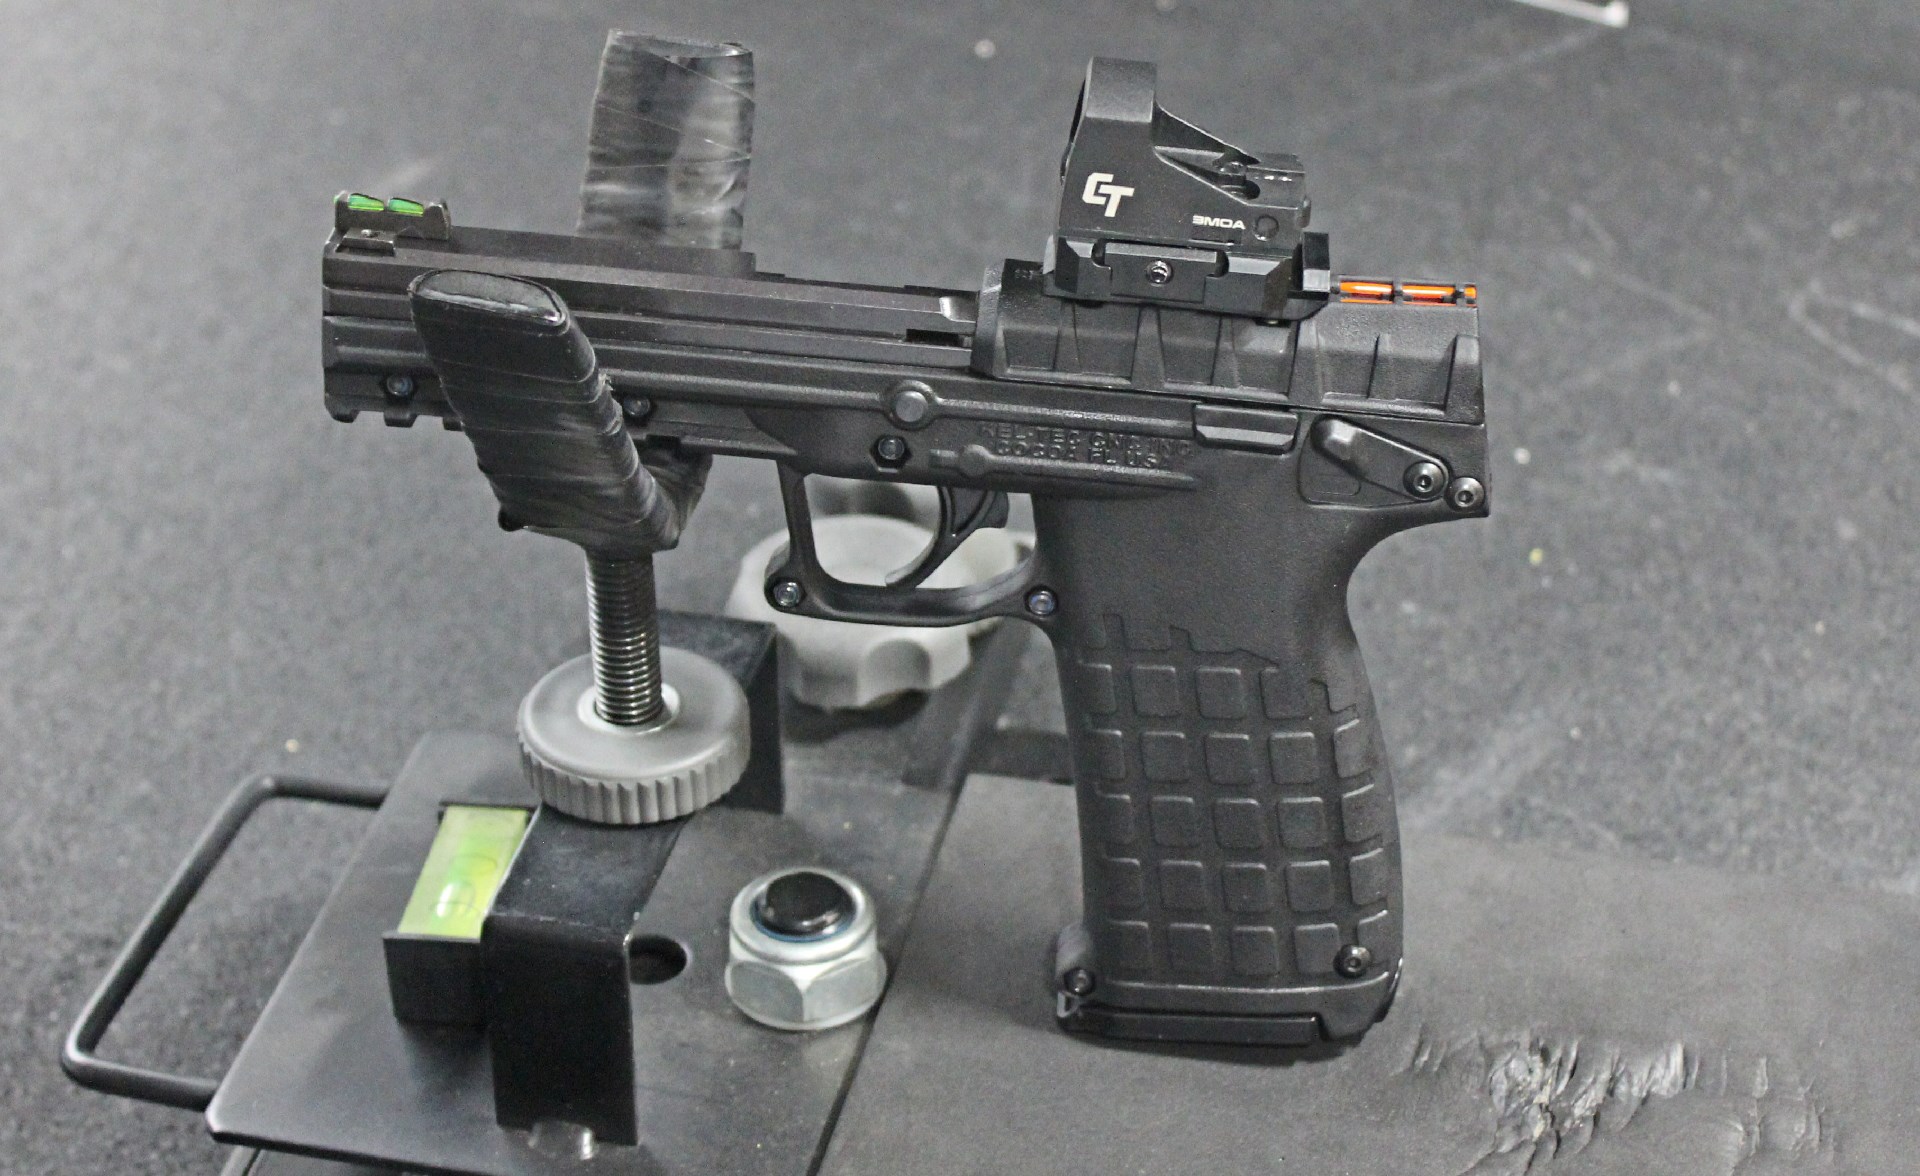 keltec pmr30 .22 wmr pistol with crimson trace red-dot optic shown resting in cradle on shooting bench indoors black matting